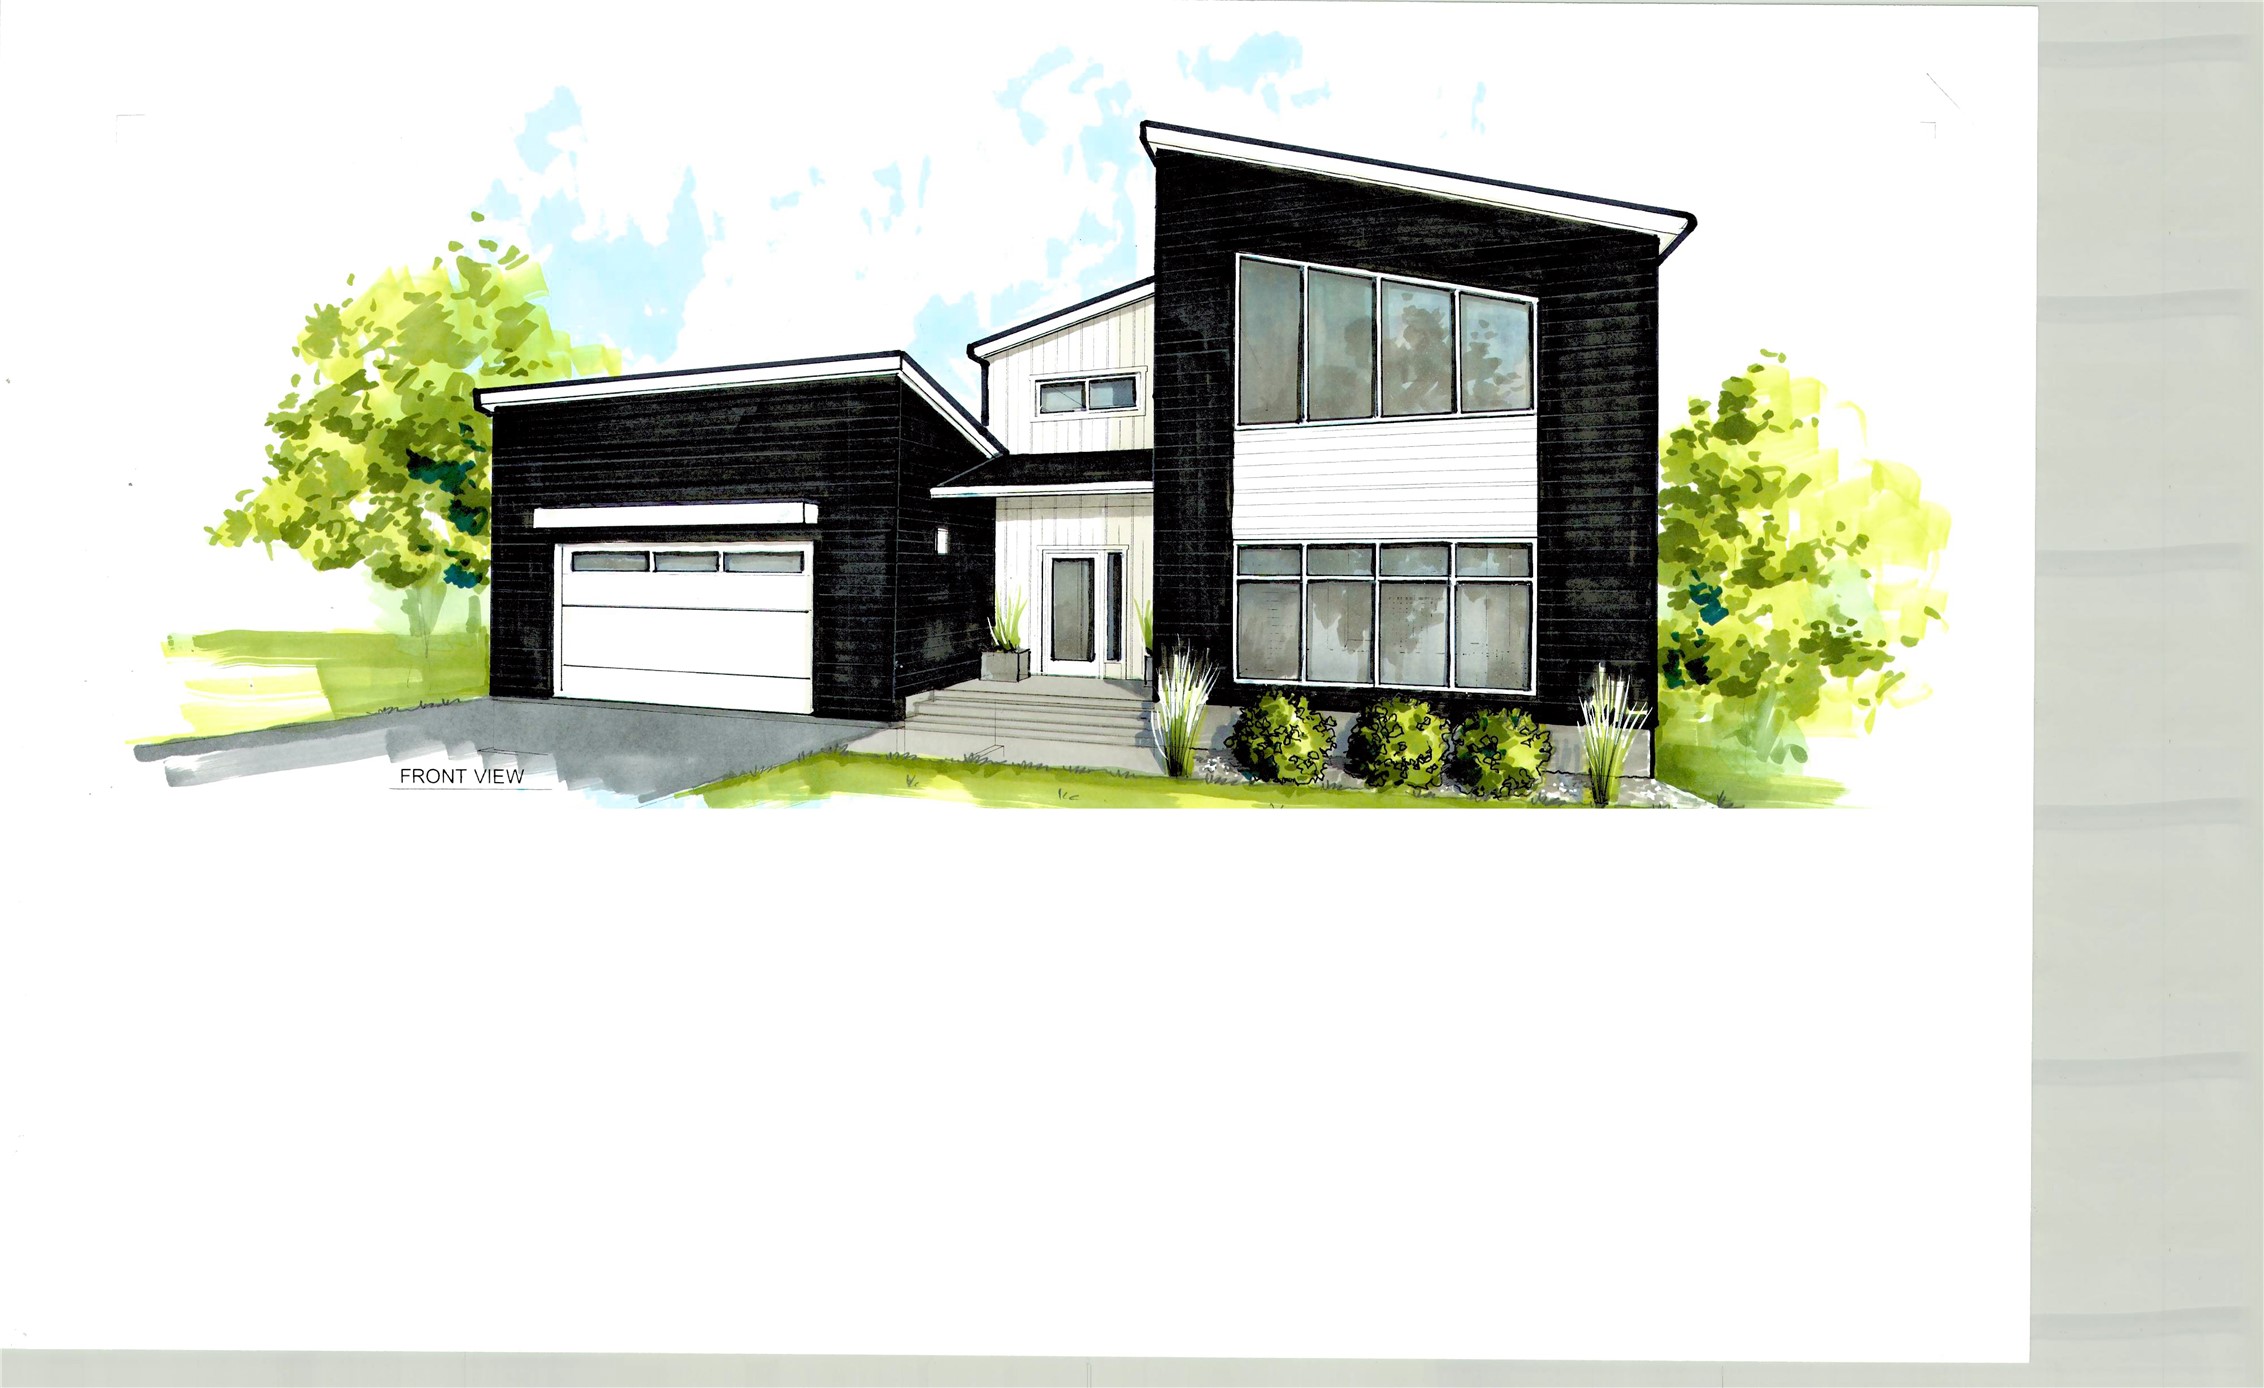 To be built mountain modern home in The Preserve Subdivision. Easy access to the bypass and only minutes from FVCC, Logan Health, and Kalispell's major shopping areas. This Orion floor plan has 2,416SF with 4 beds, 2.5 baths and attached two car garage. House has quartz countertops, large kitchen island, family room, & underground sprinklers. Subdivision offers walking trails, dog park, and play ground all within close distance to the home. Contact Cecil Waatti 406.890.4000 Layne Massie 406.270.6664 or your real estate professional.